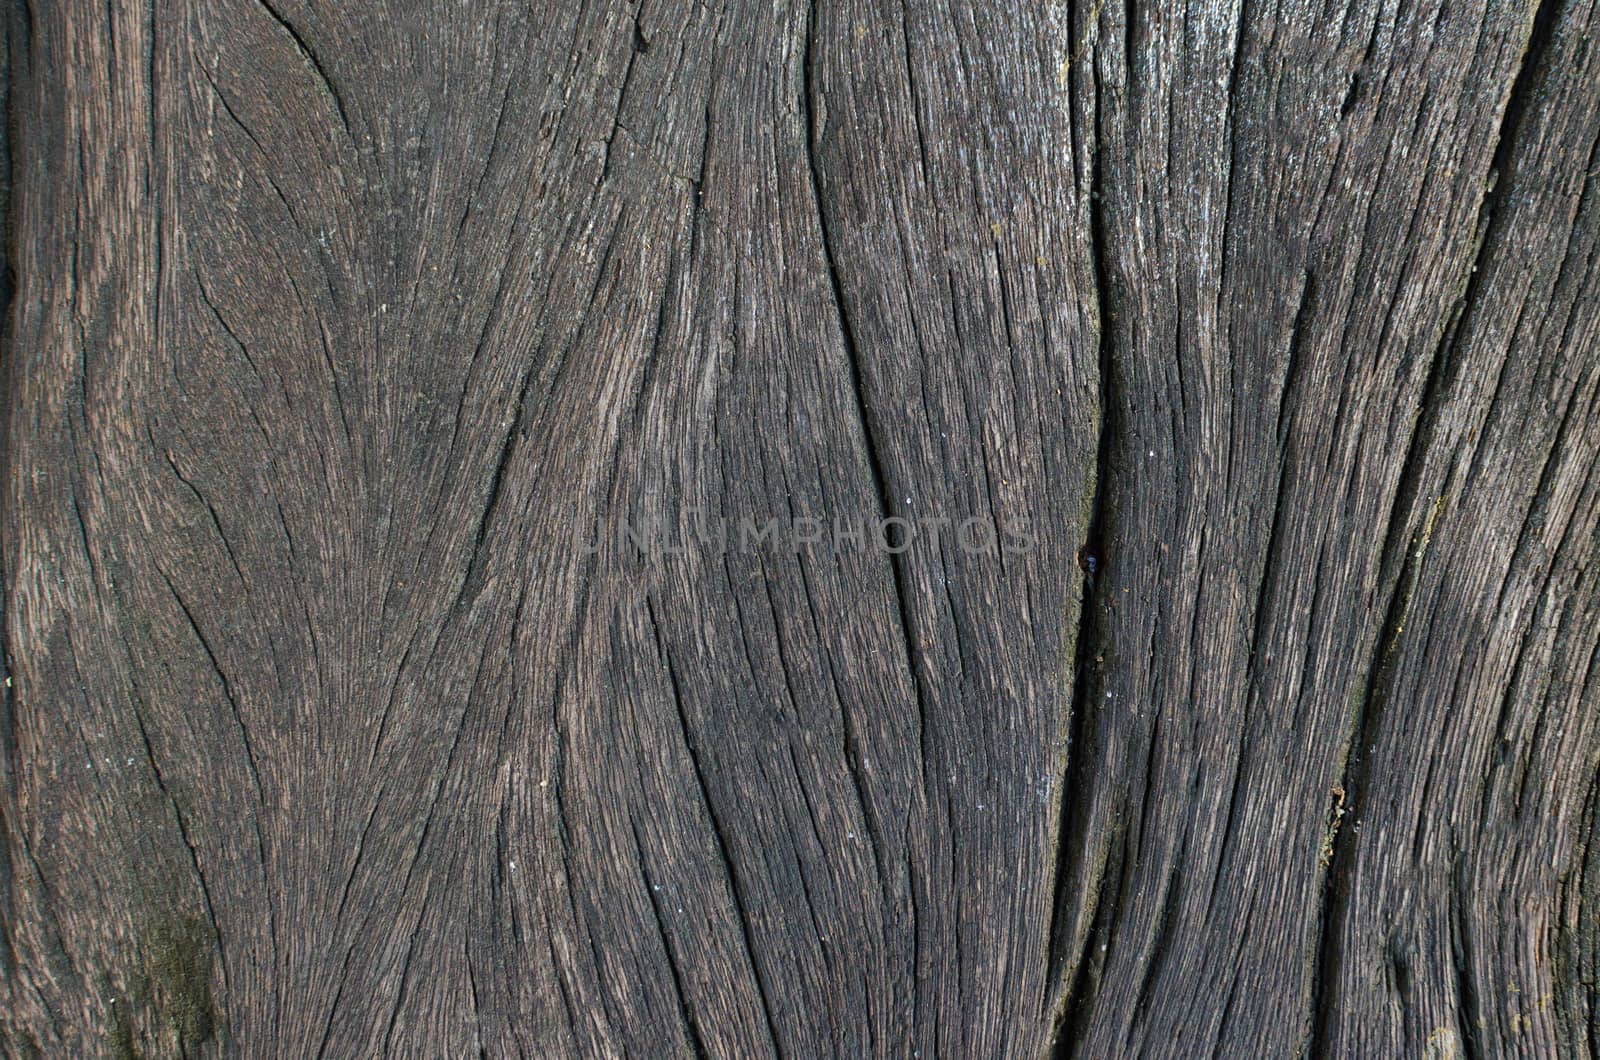 large and textured dark old wooden grunge background by nopparats